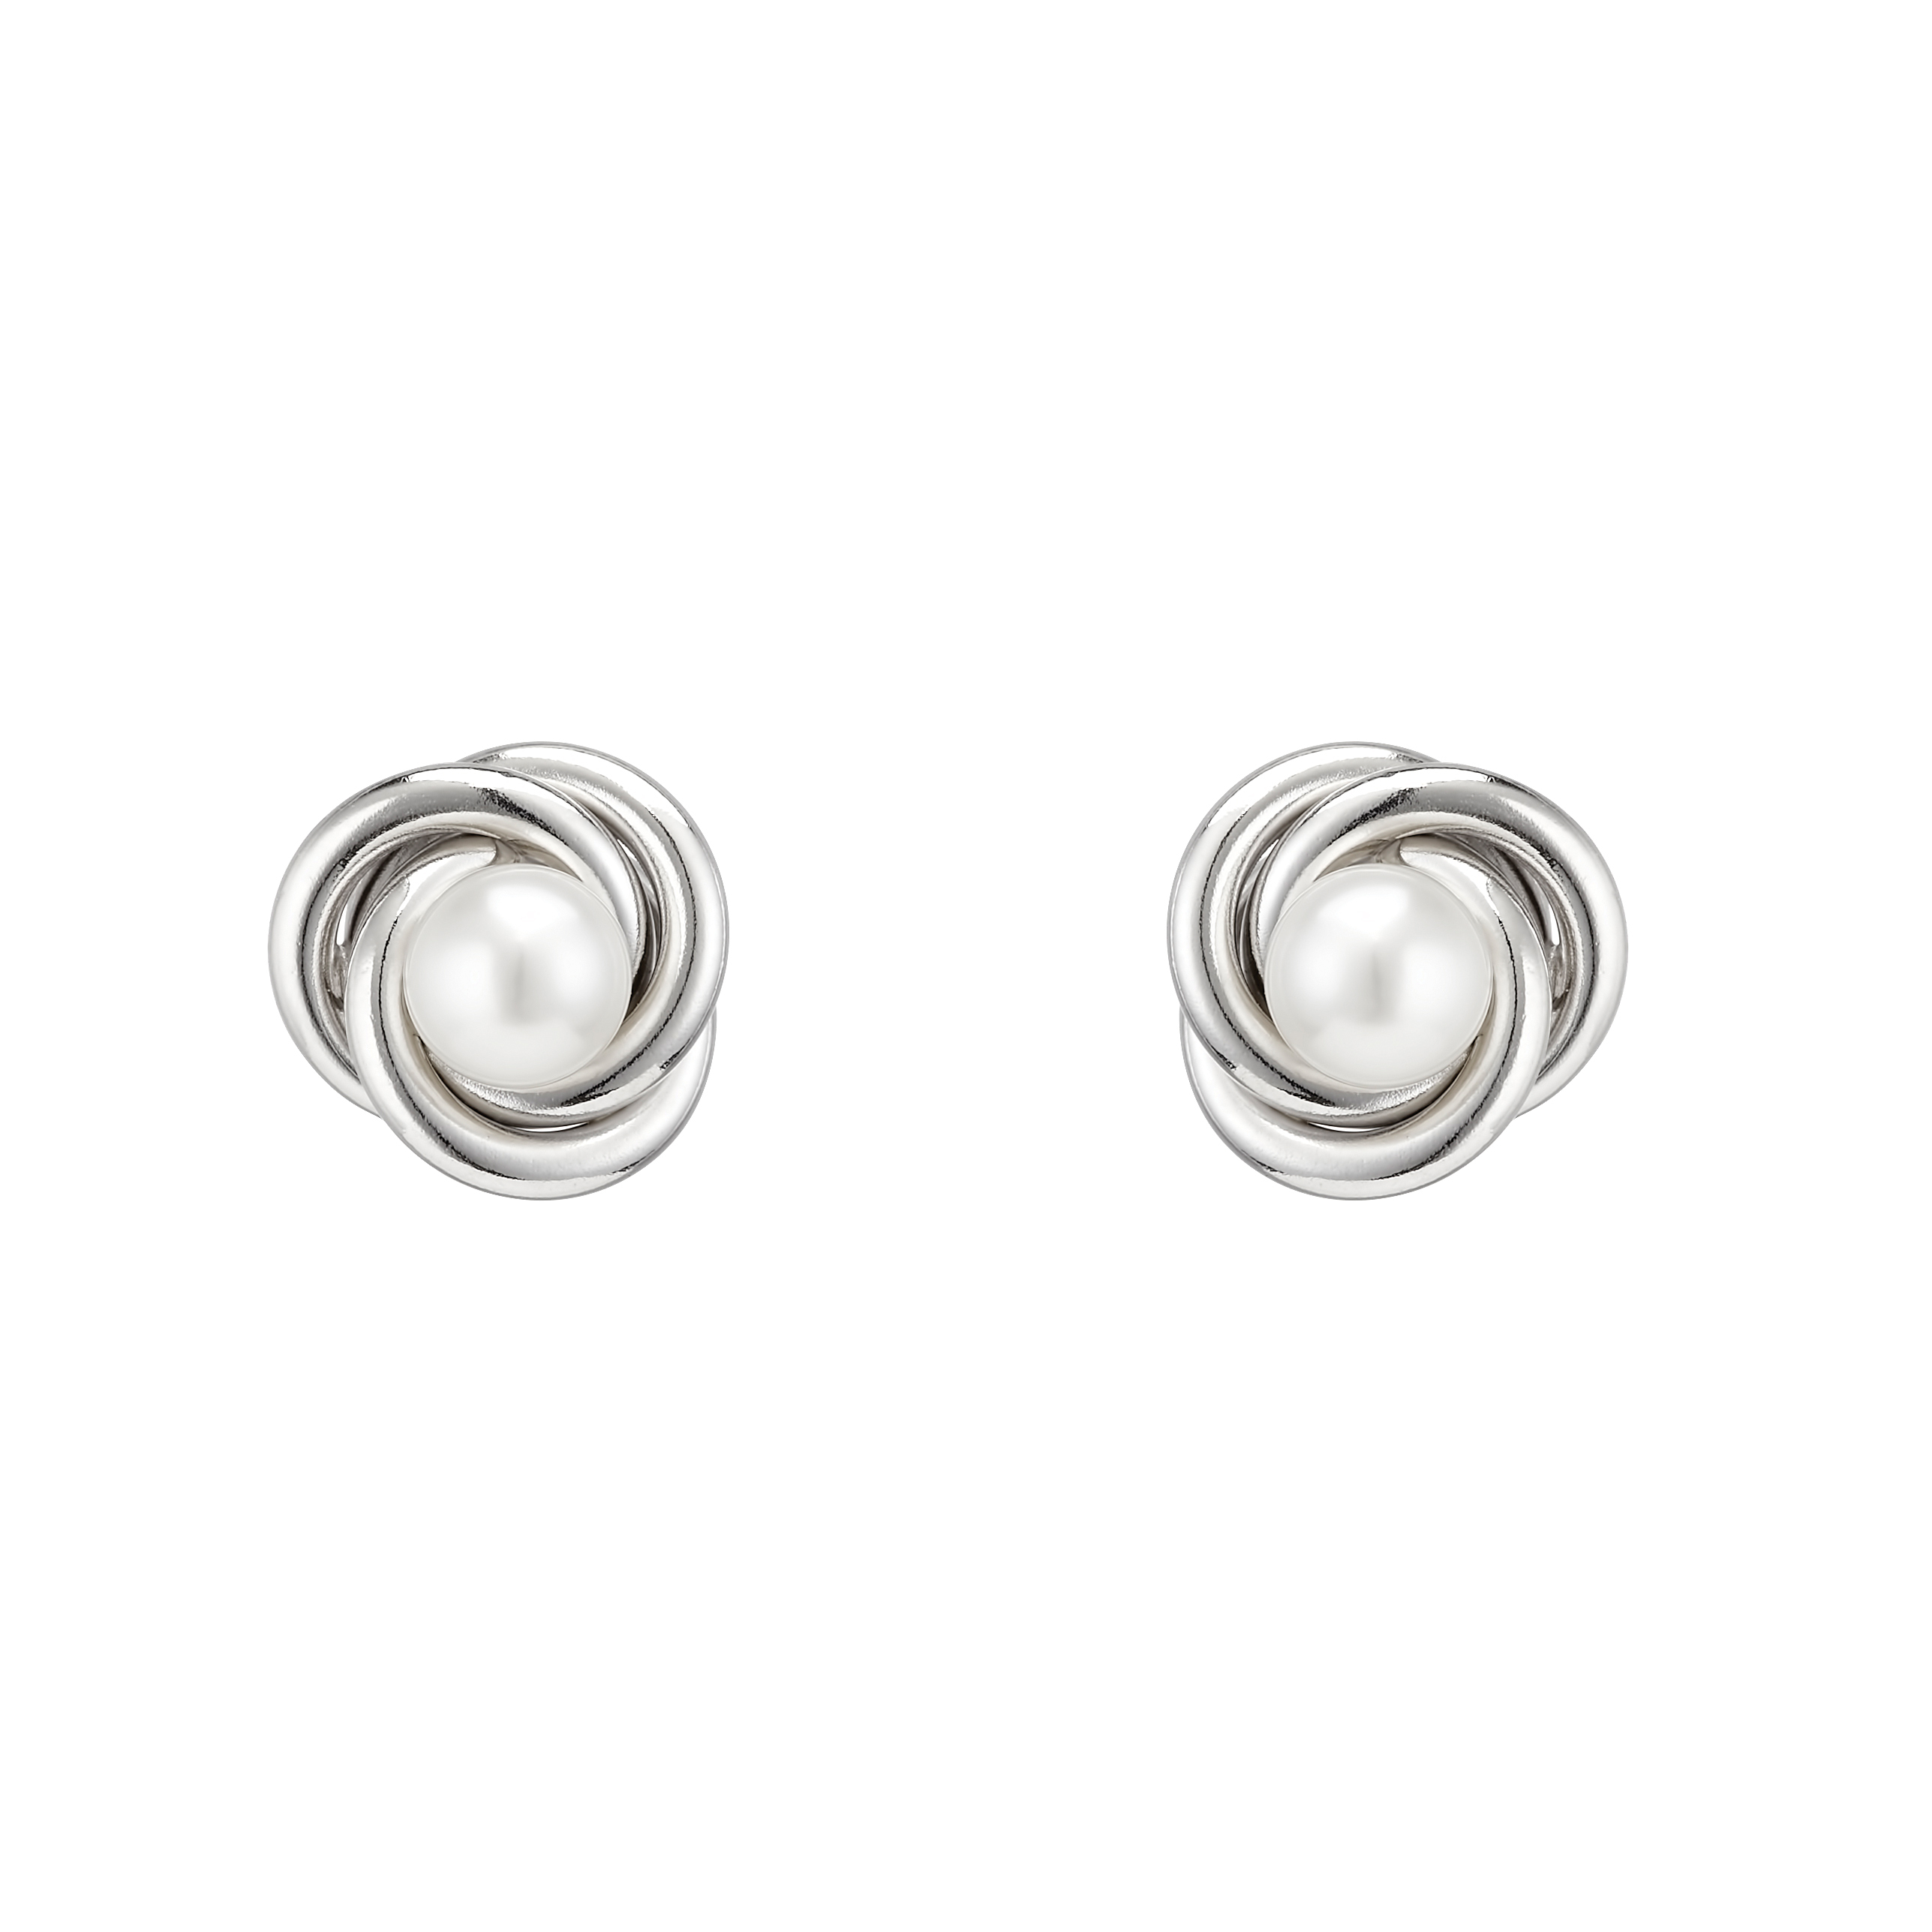 Kinder Ohrclips - Sterling Silver Knot with Pearl Stud Earrings